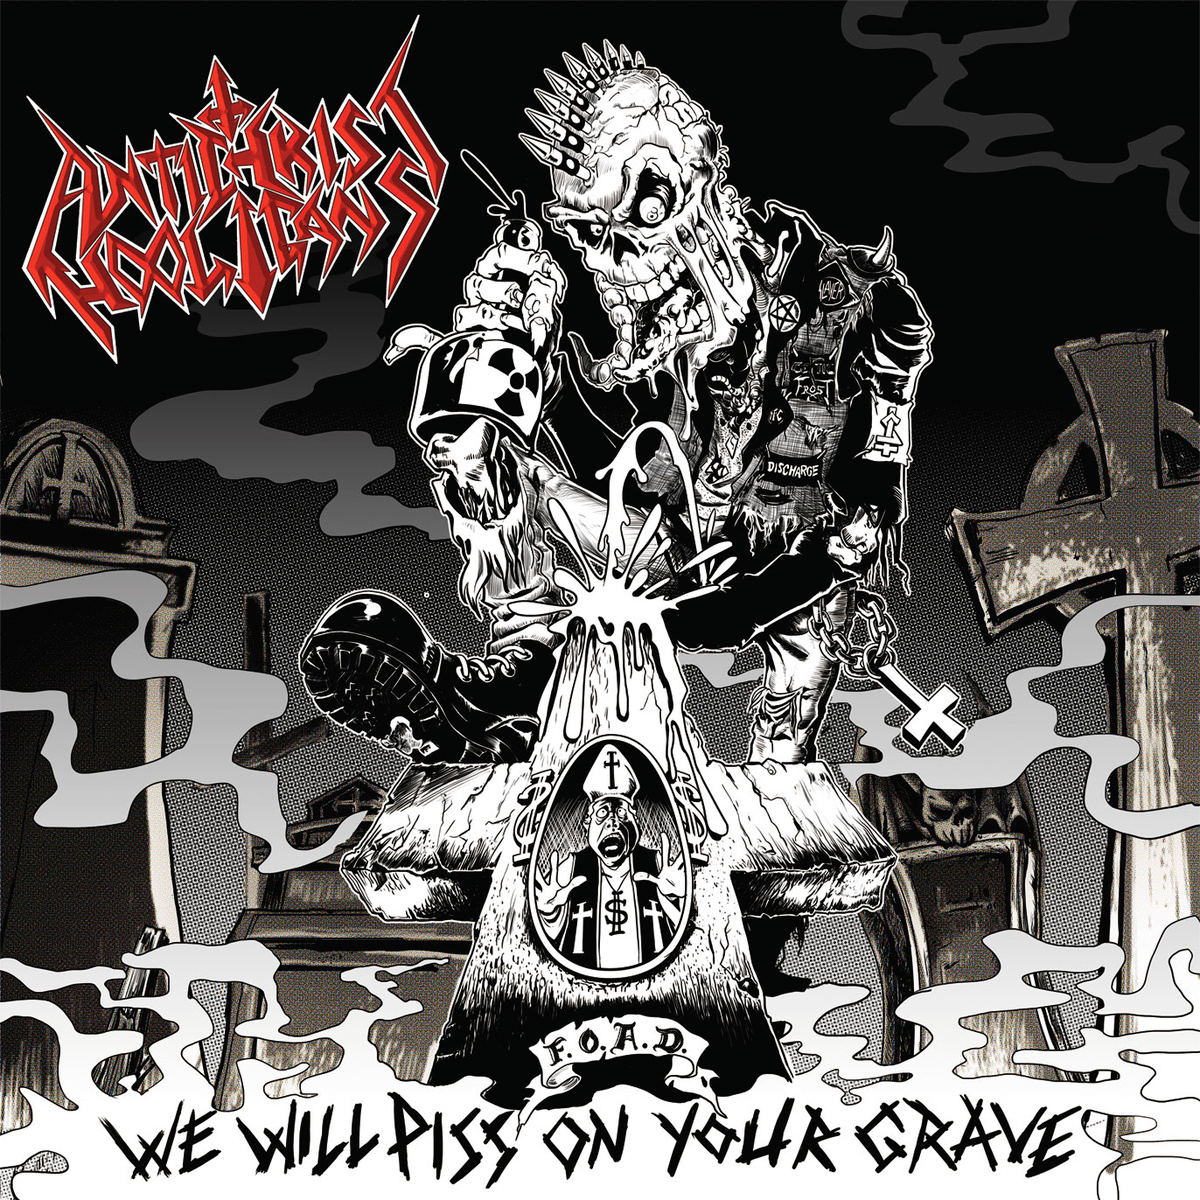 Antichrist Hooligans - We Will Piss on Your Grave (2013) FLAC Download